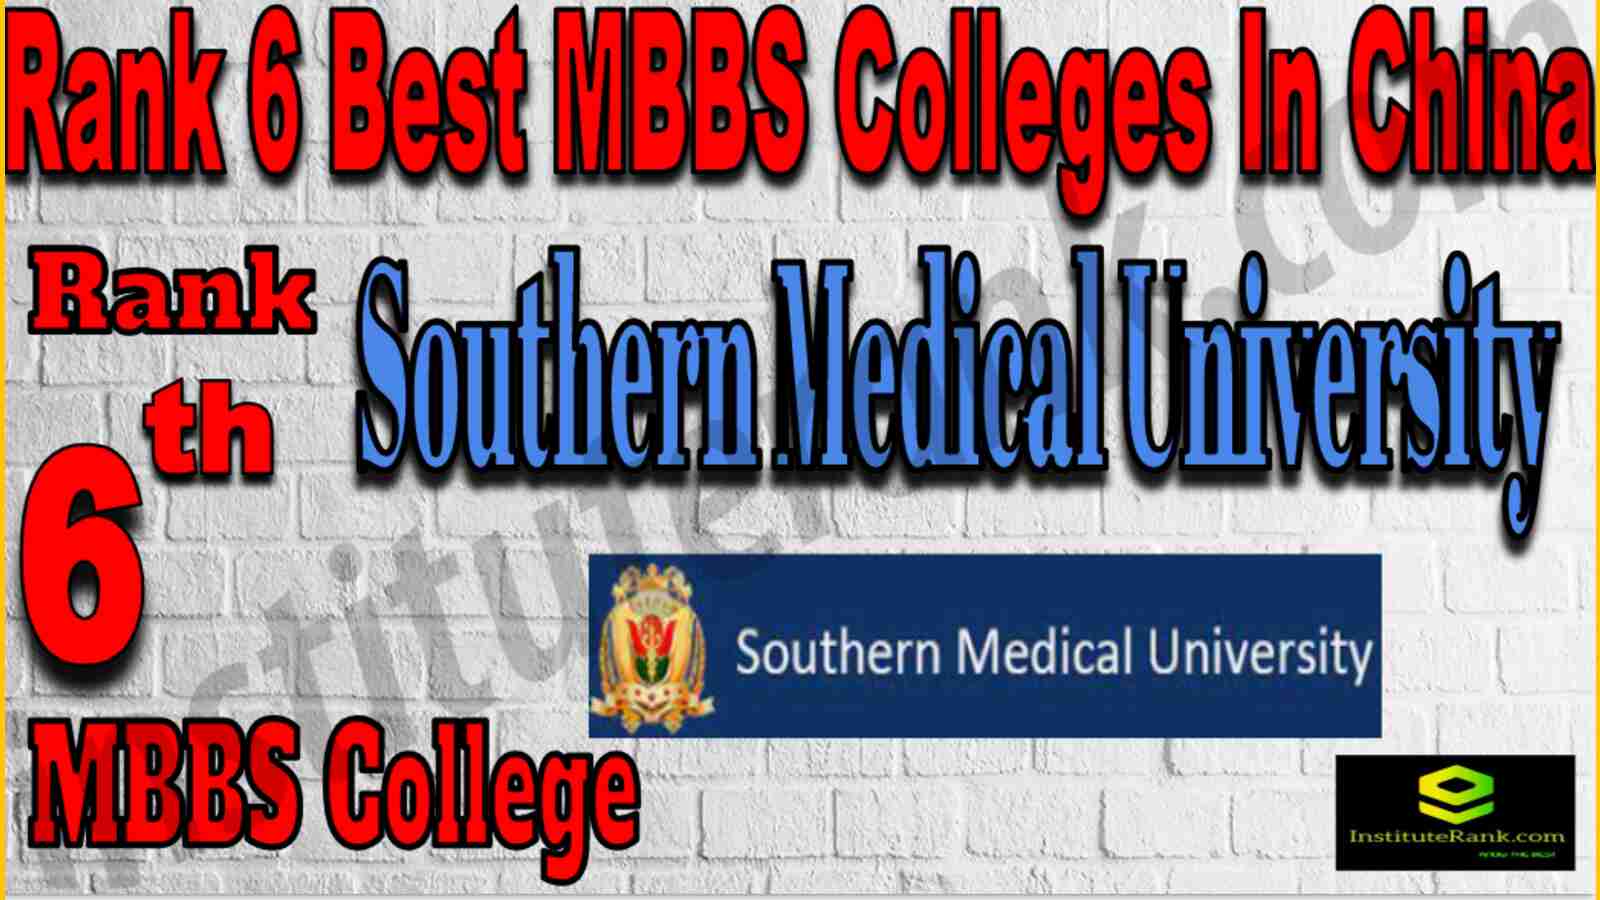 Rank 6 Best MBBS Colleges In China